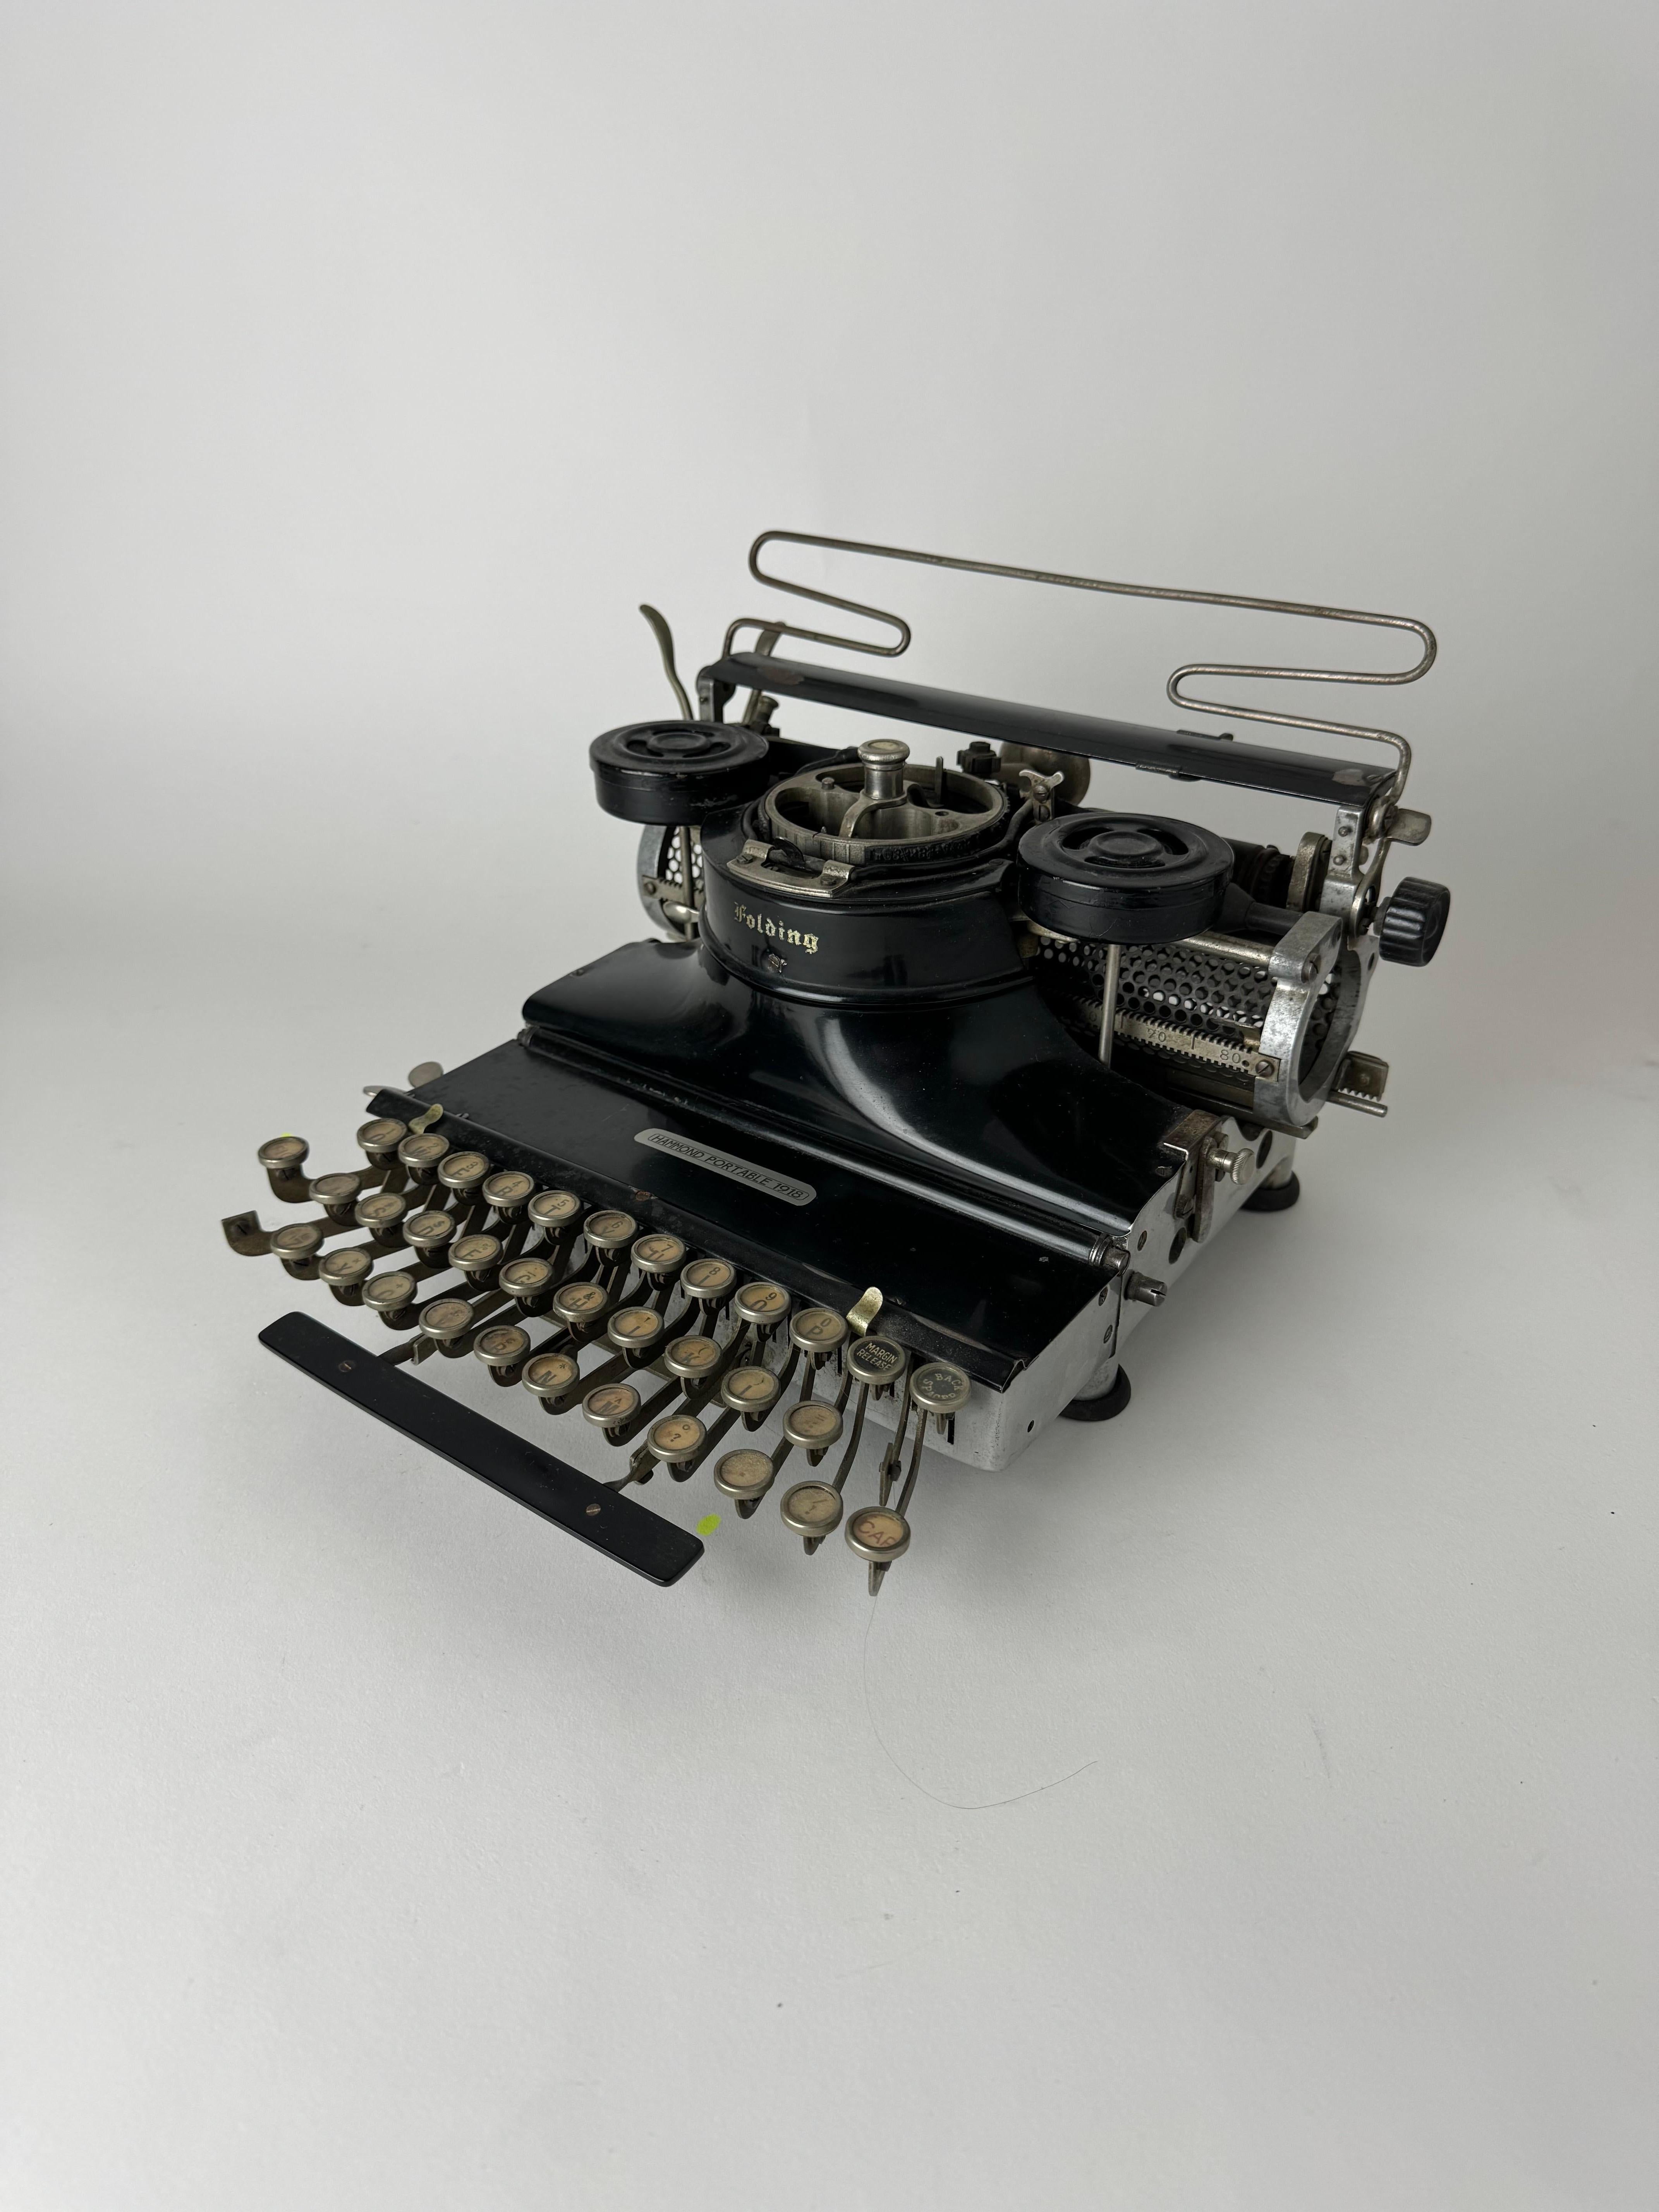 For sale we have a beautiful antique typewriter. This 1918 Antique Hammond Folding typewriter is a great relic from the early 20the century that will add cool industrial detail to your interior. 

All the parts on this Hammond typewriter are moving